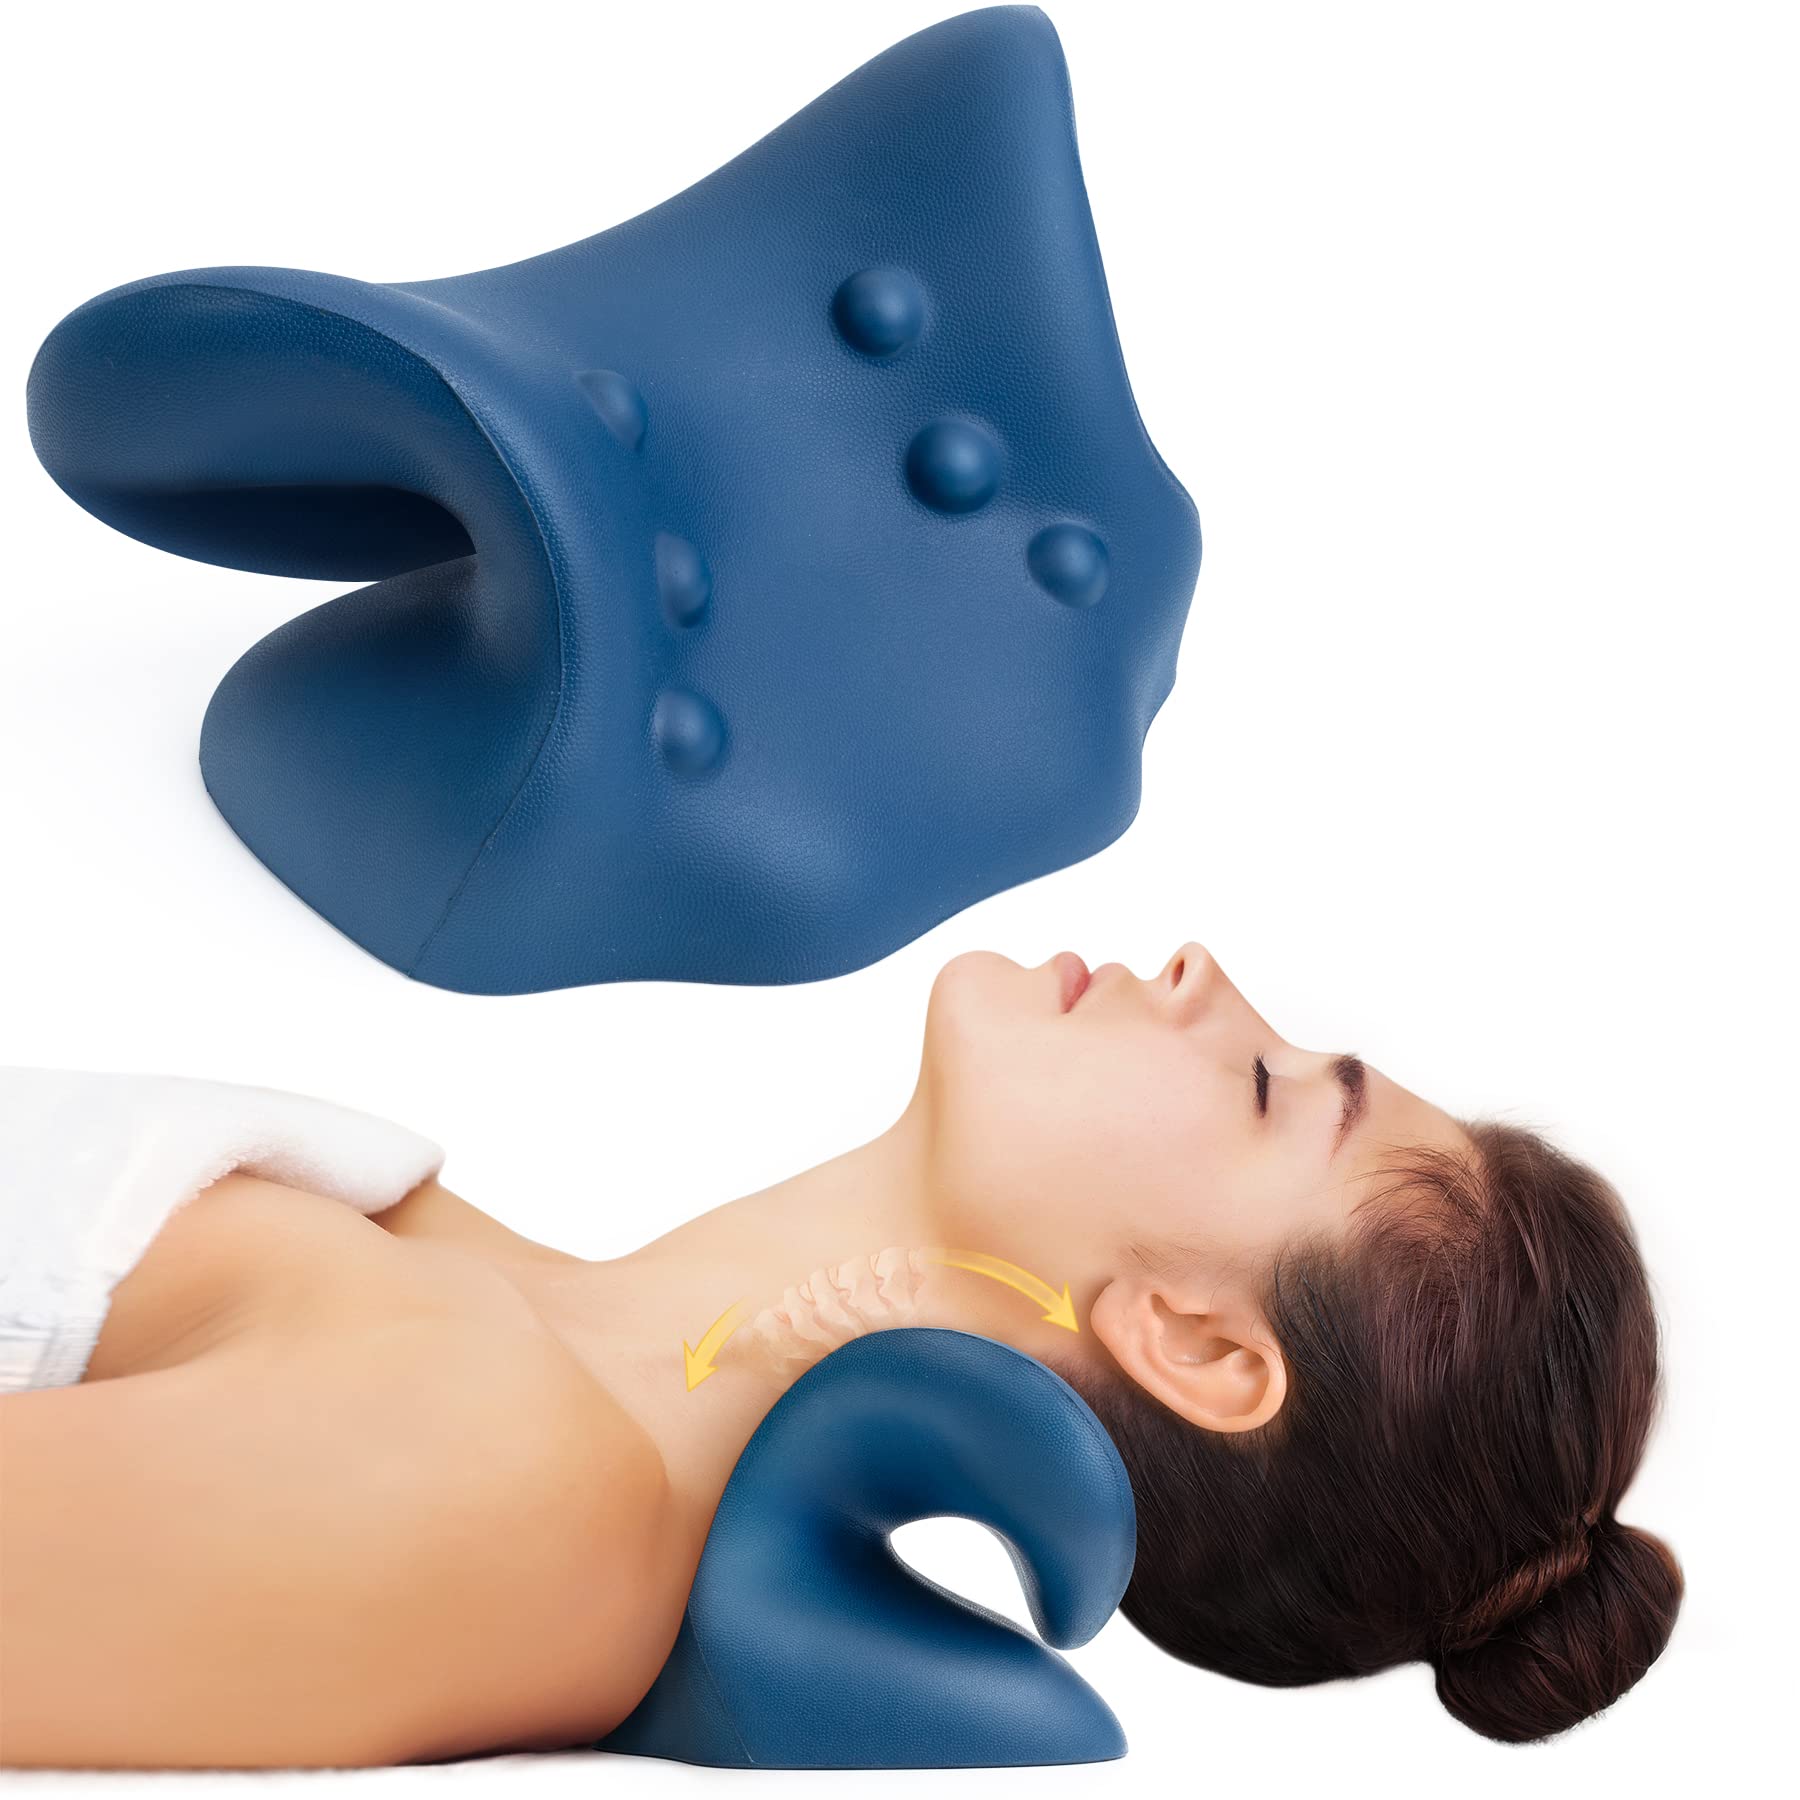 Neck Stretcher, Neck Cloud - Cervical Traction Device for Spine Alignment,  Neck and Shoulder Relaxer, Neck Chiropractic Pillow for TMJ Pain Relief  (Blue) 